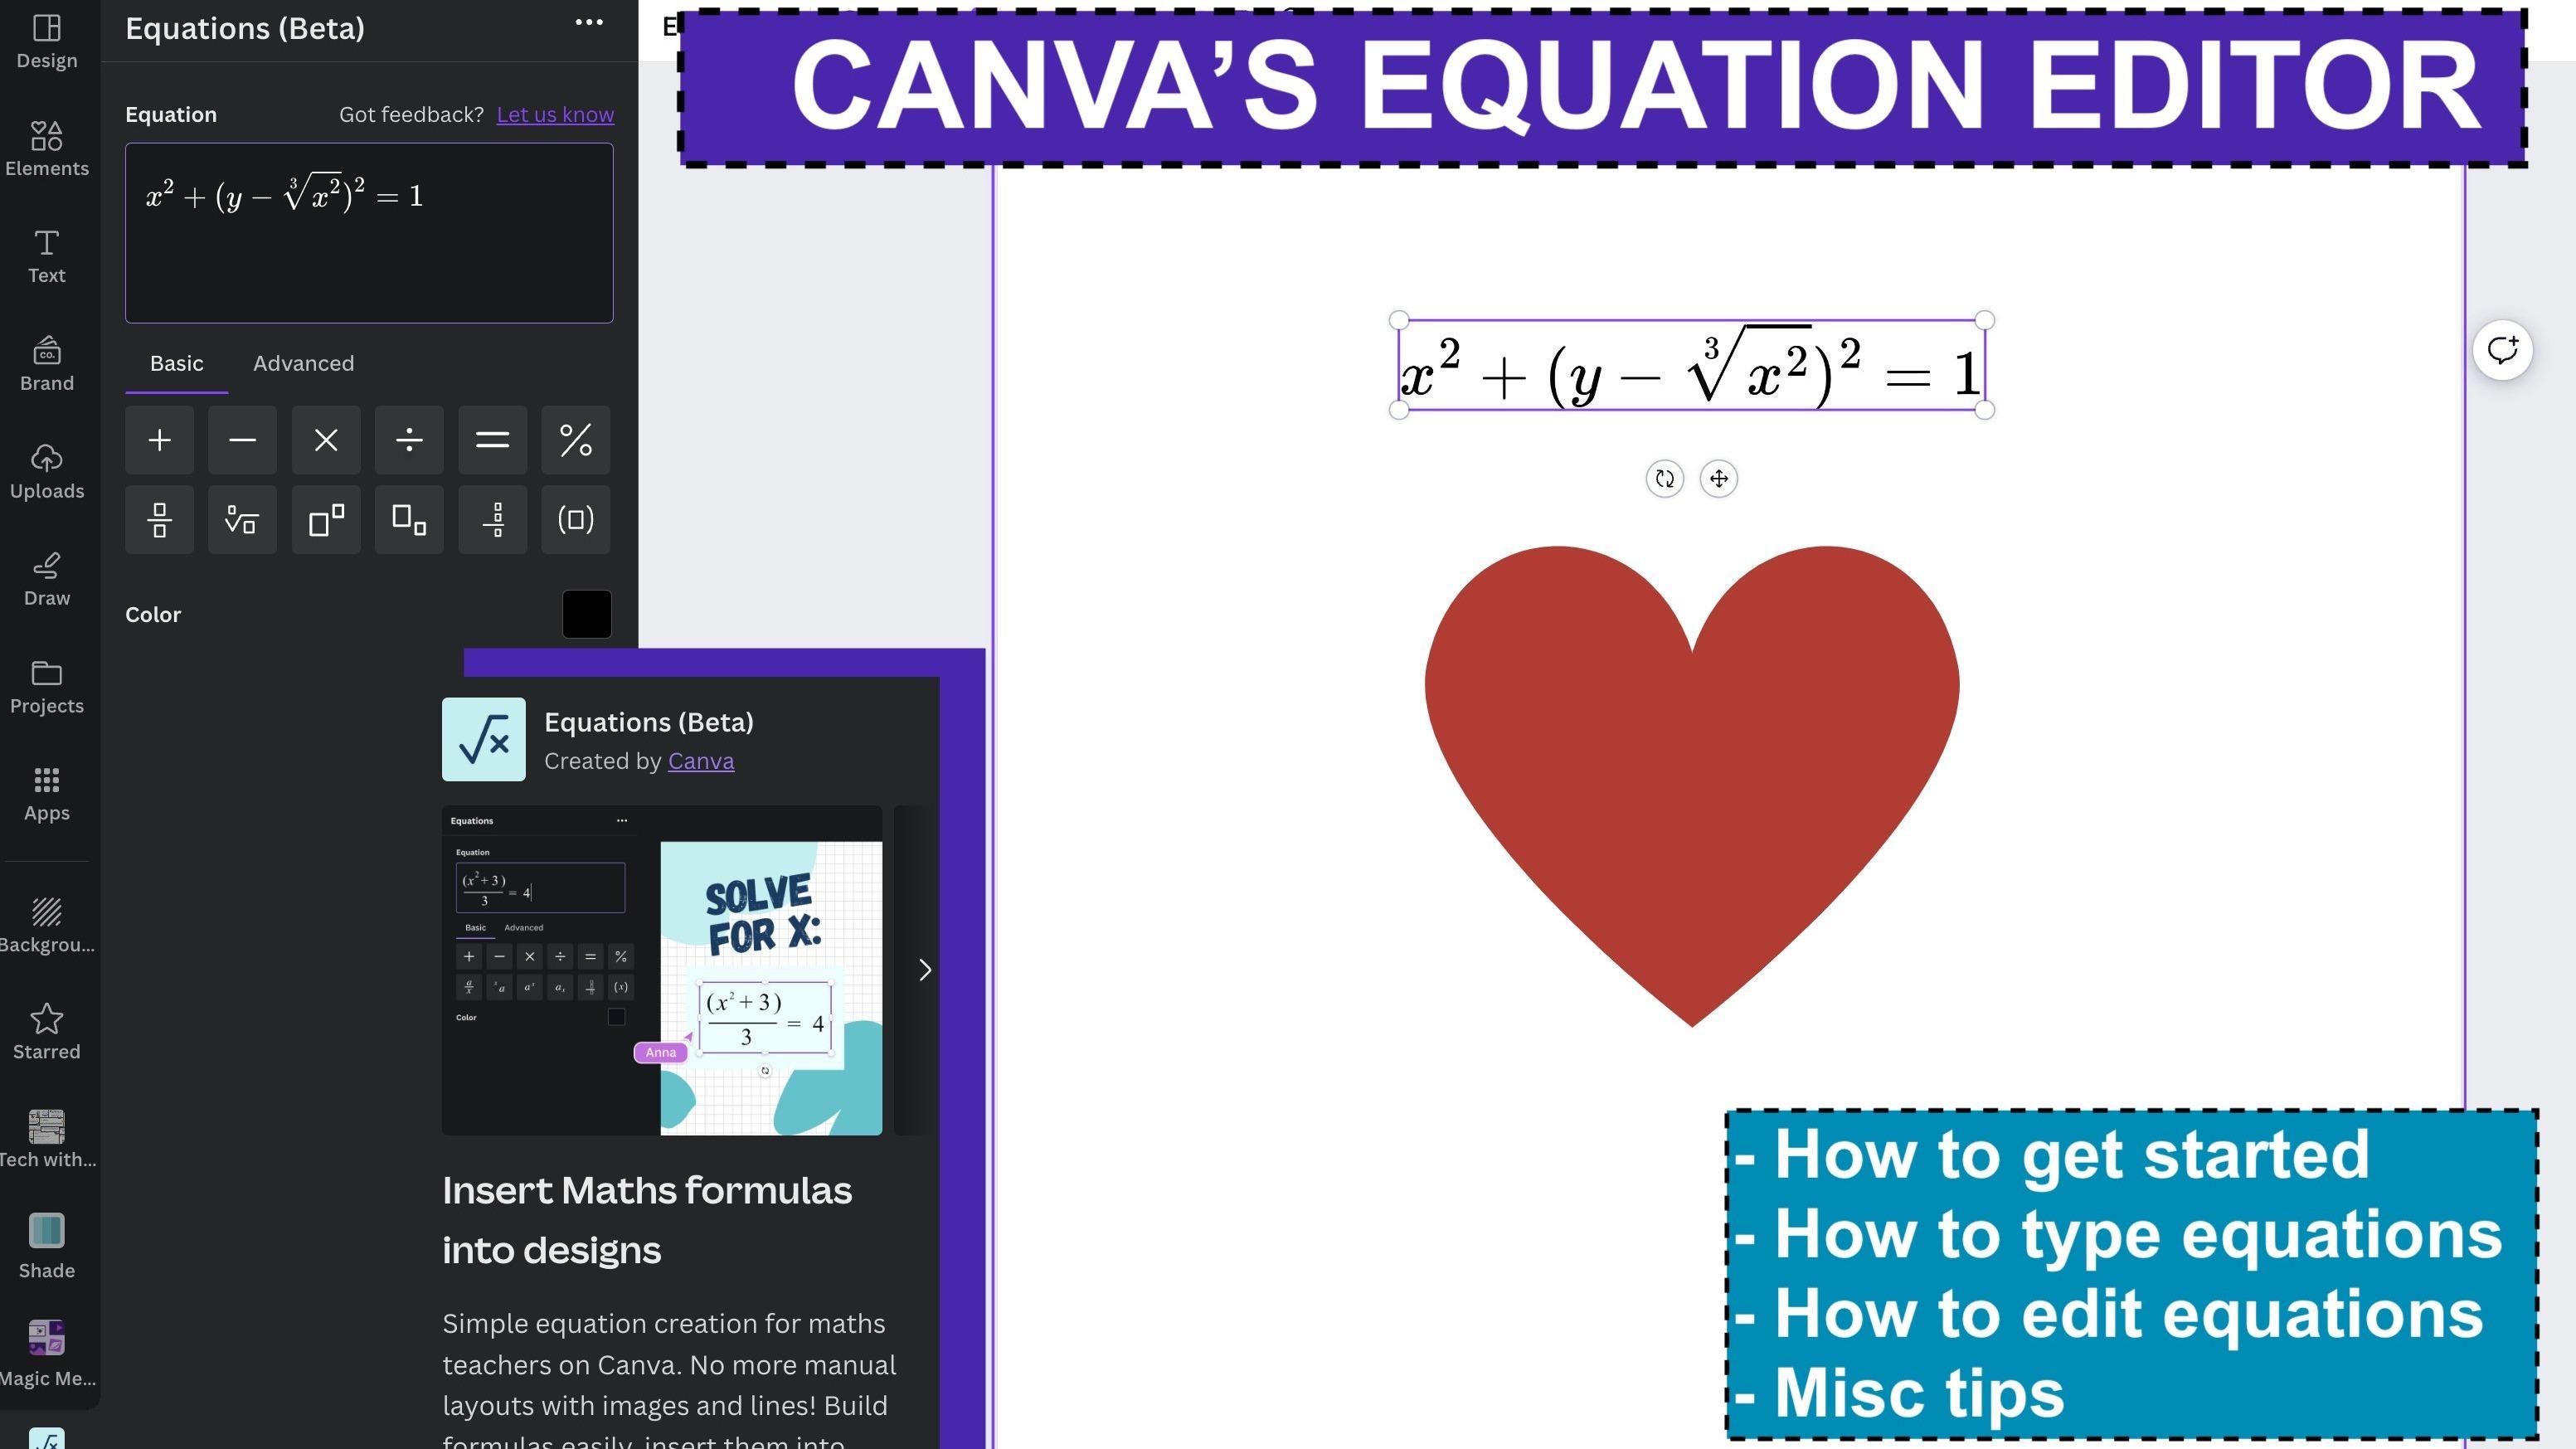 Type EQUATIONS using Canva's new equation editor